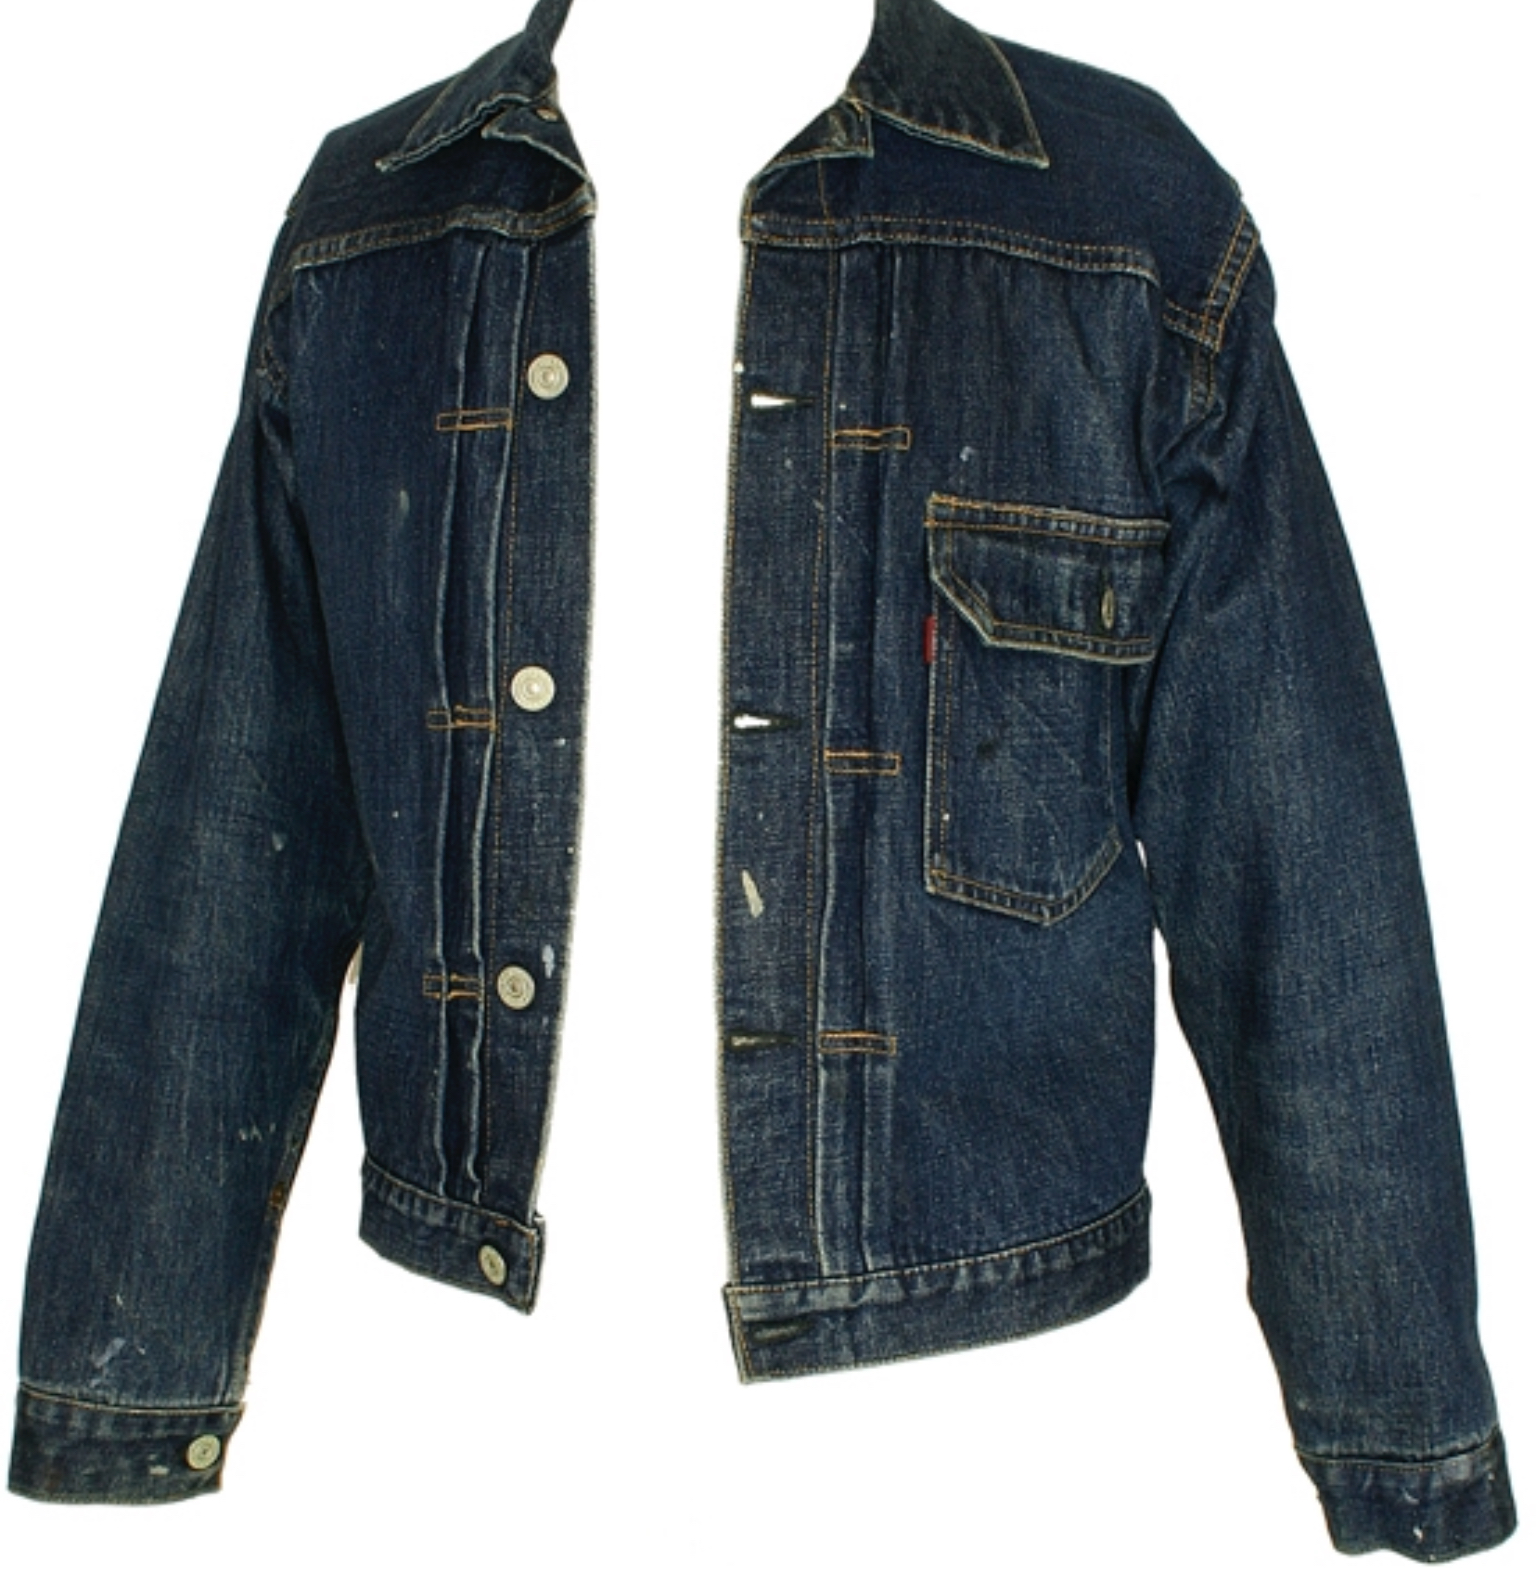 Levi’s in leather | Vintage Leather Jackets Forum